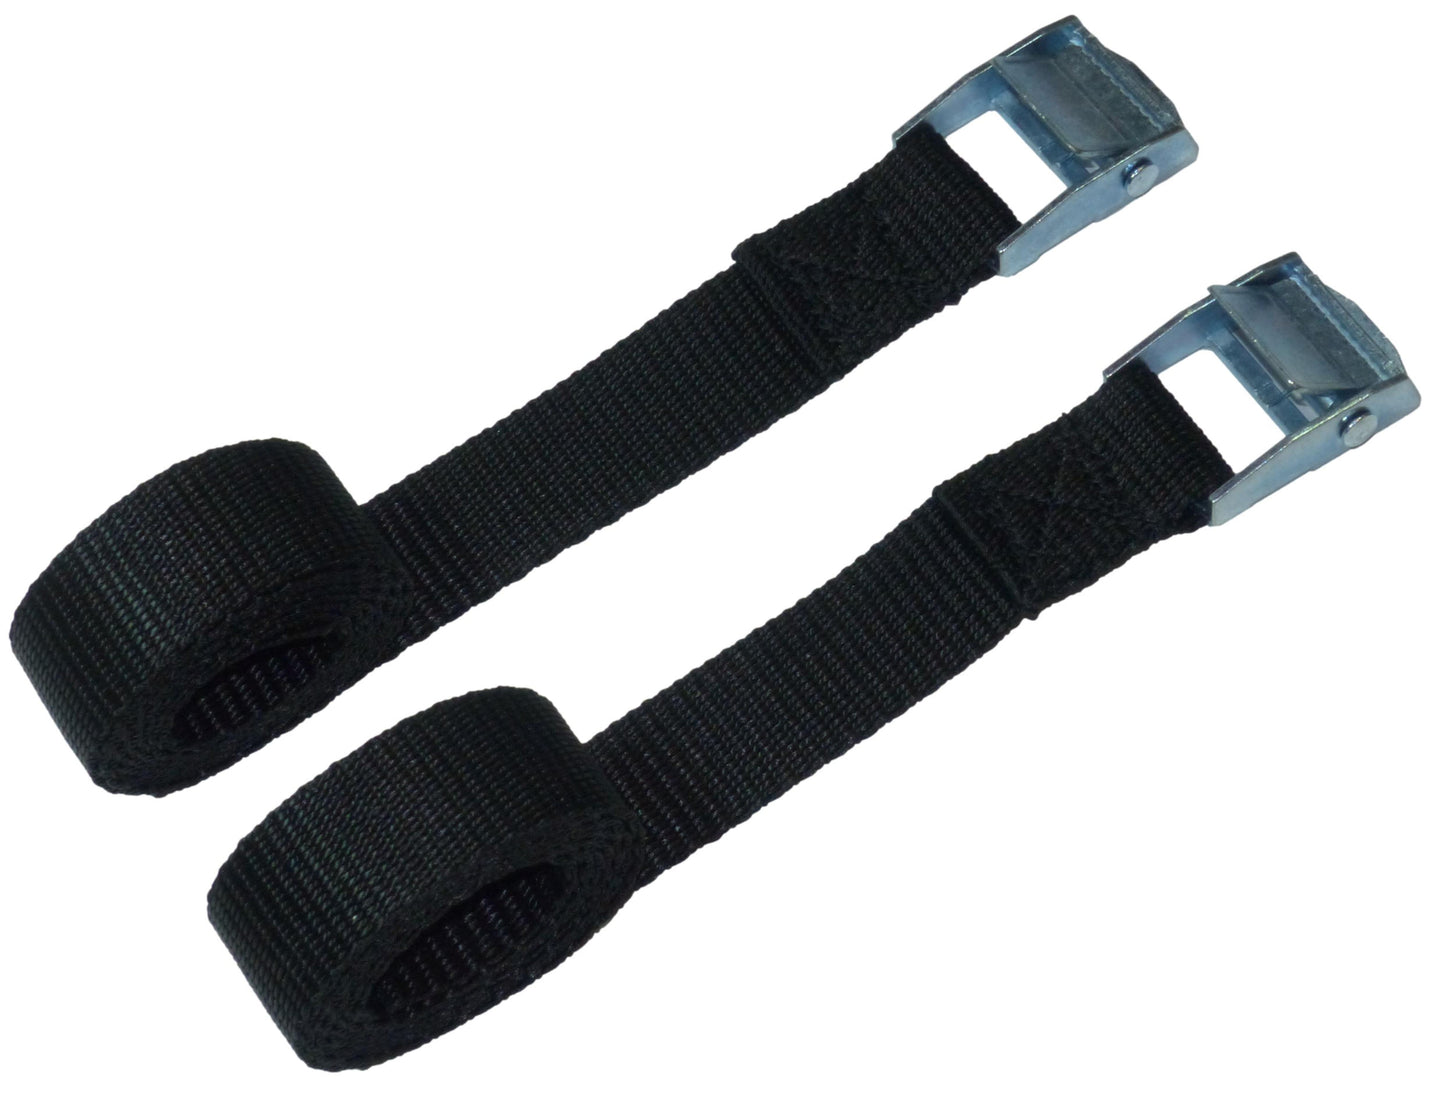 Benristraps 25mm Webbing Strap with Alloy Cam Buckle (Pair)